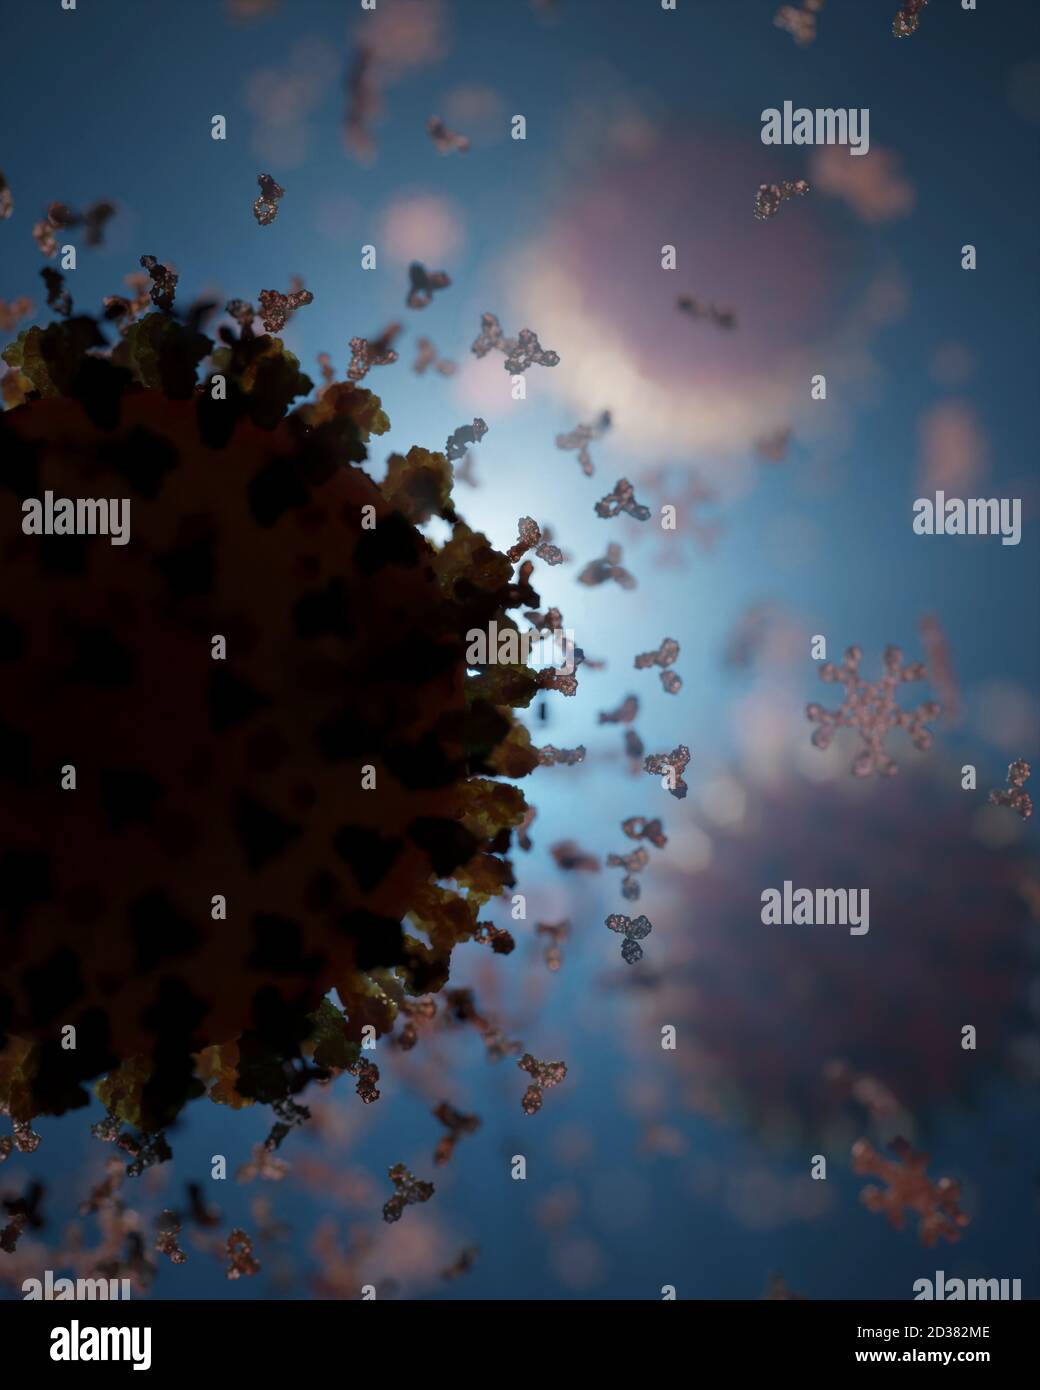 Cluster of human antibodies (igG and igM) attacking a Corona virus (Covid 19). An accurate model based on scientific structural data from the PDB. Stock Photo